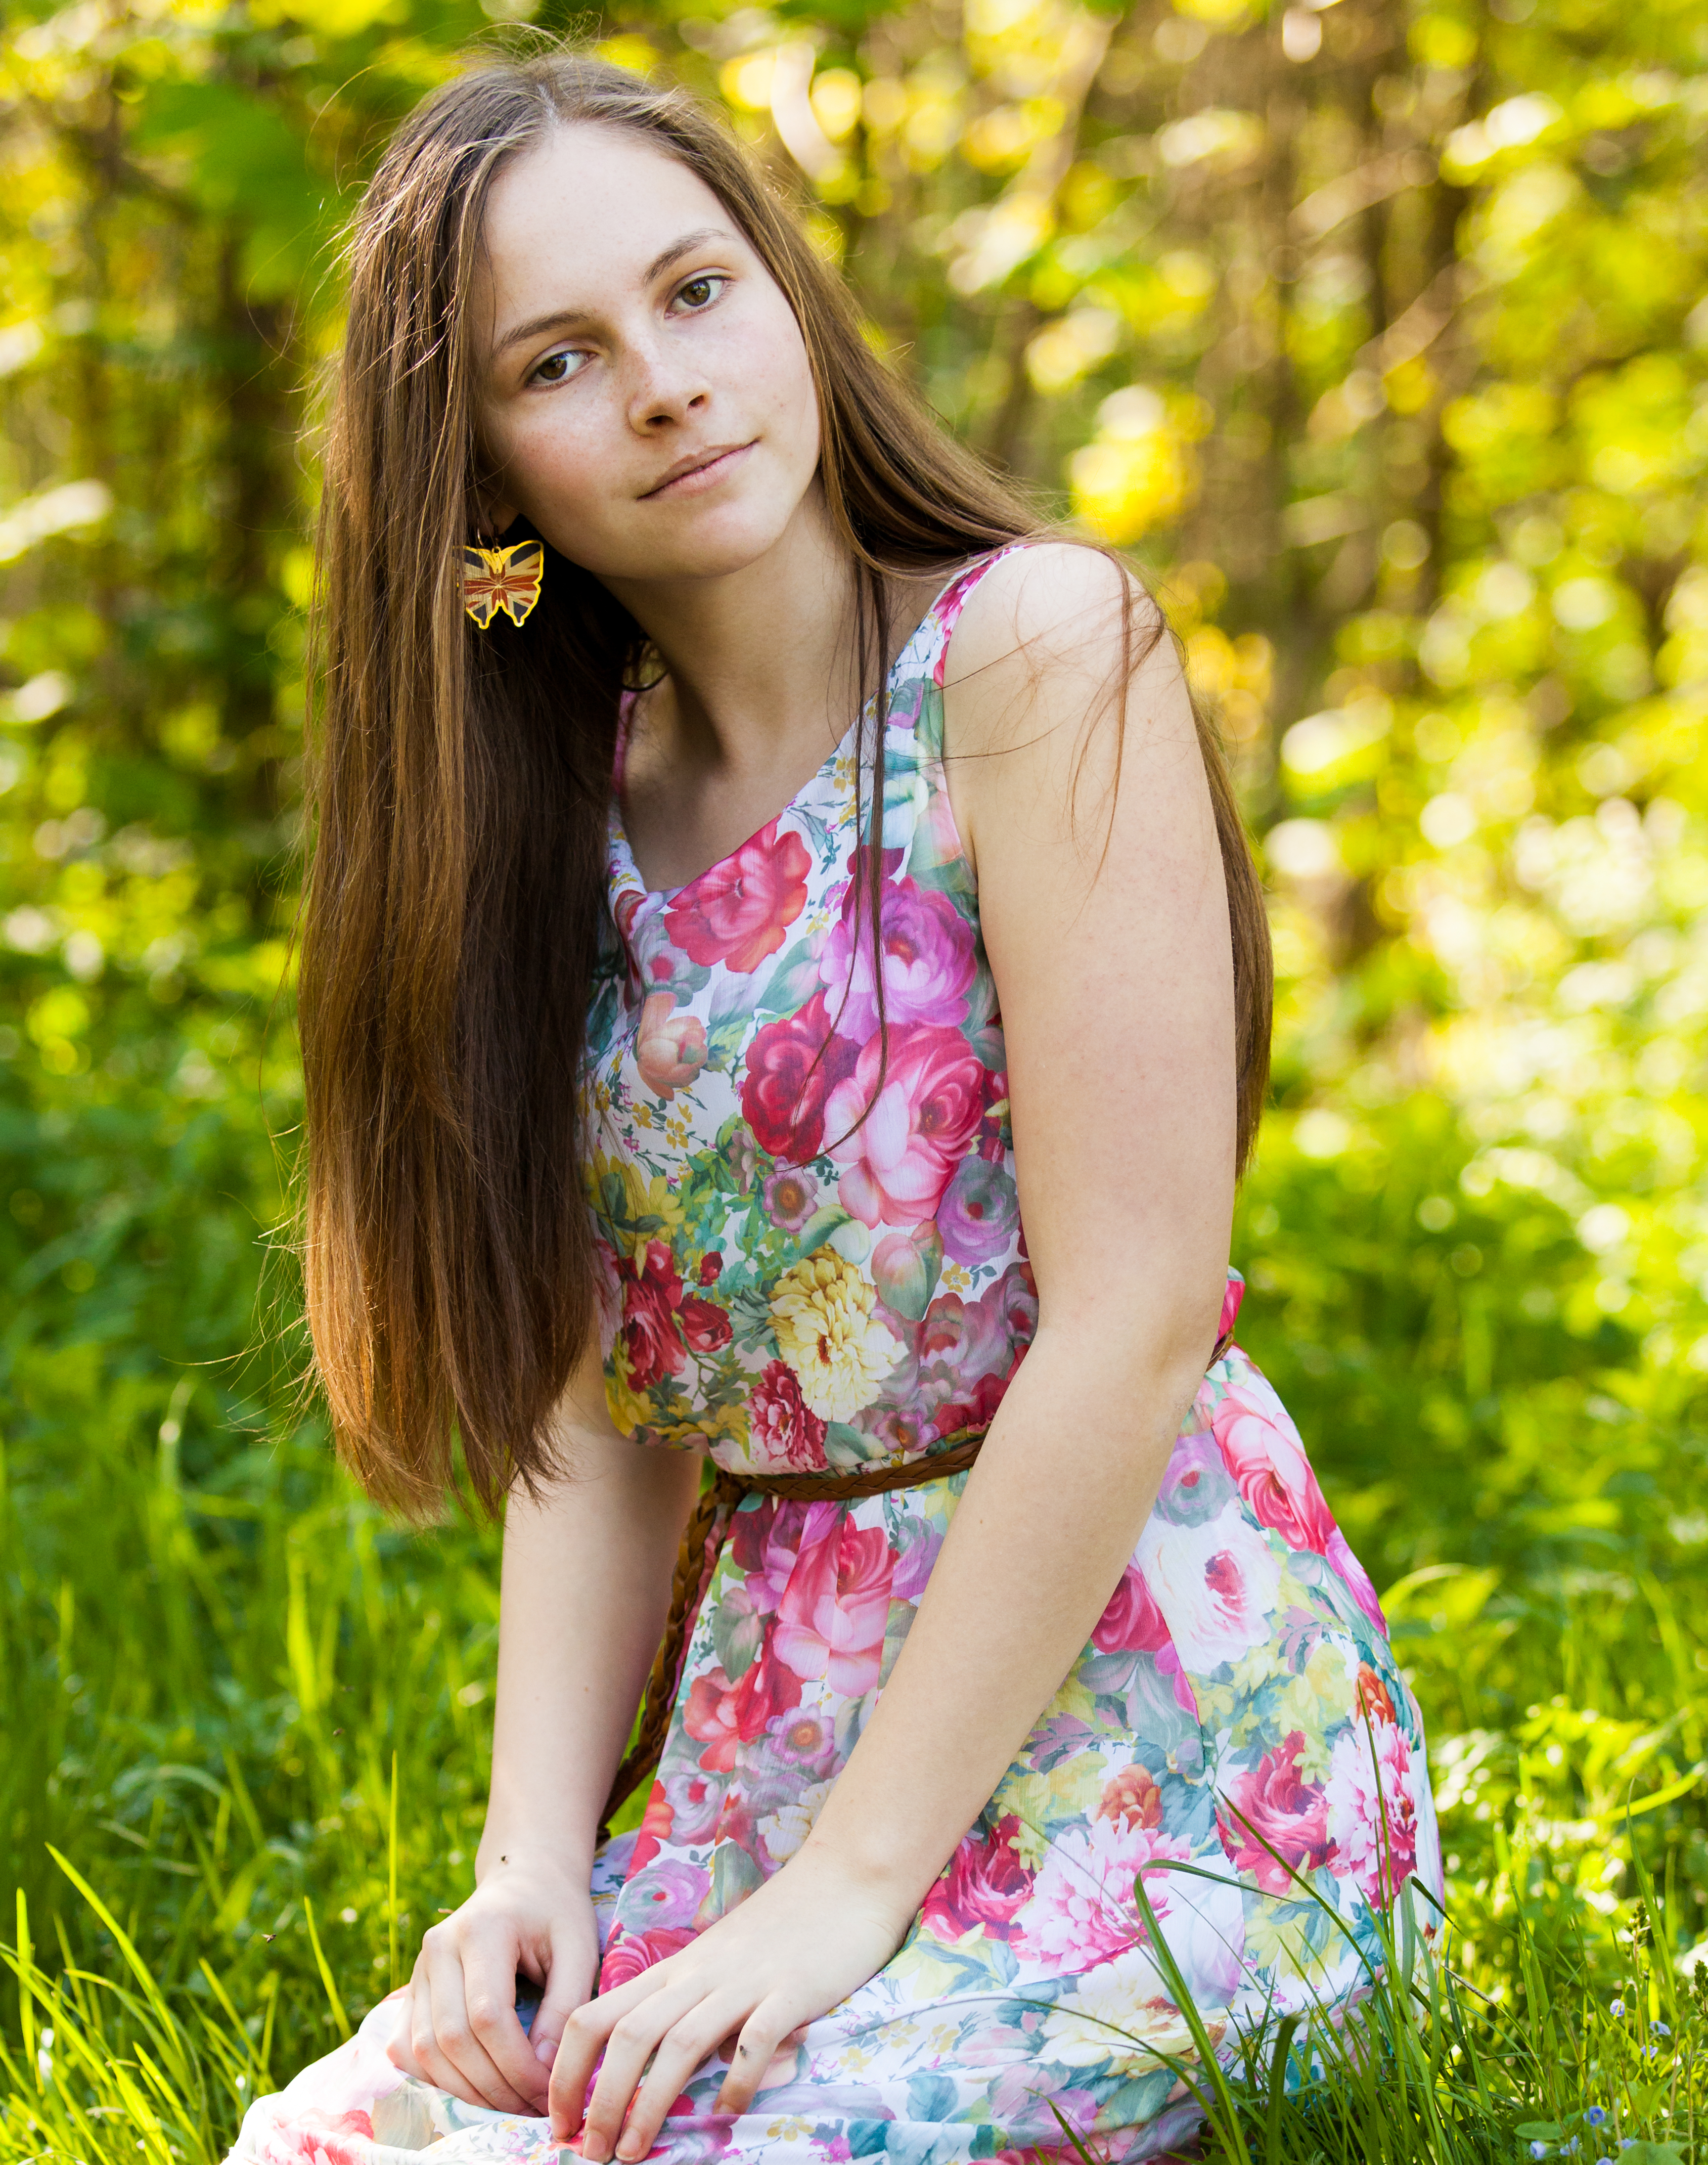 Photo Of An Amazingly Photogenic 13 Year Old Girl Photographed In May.